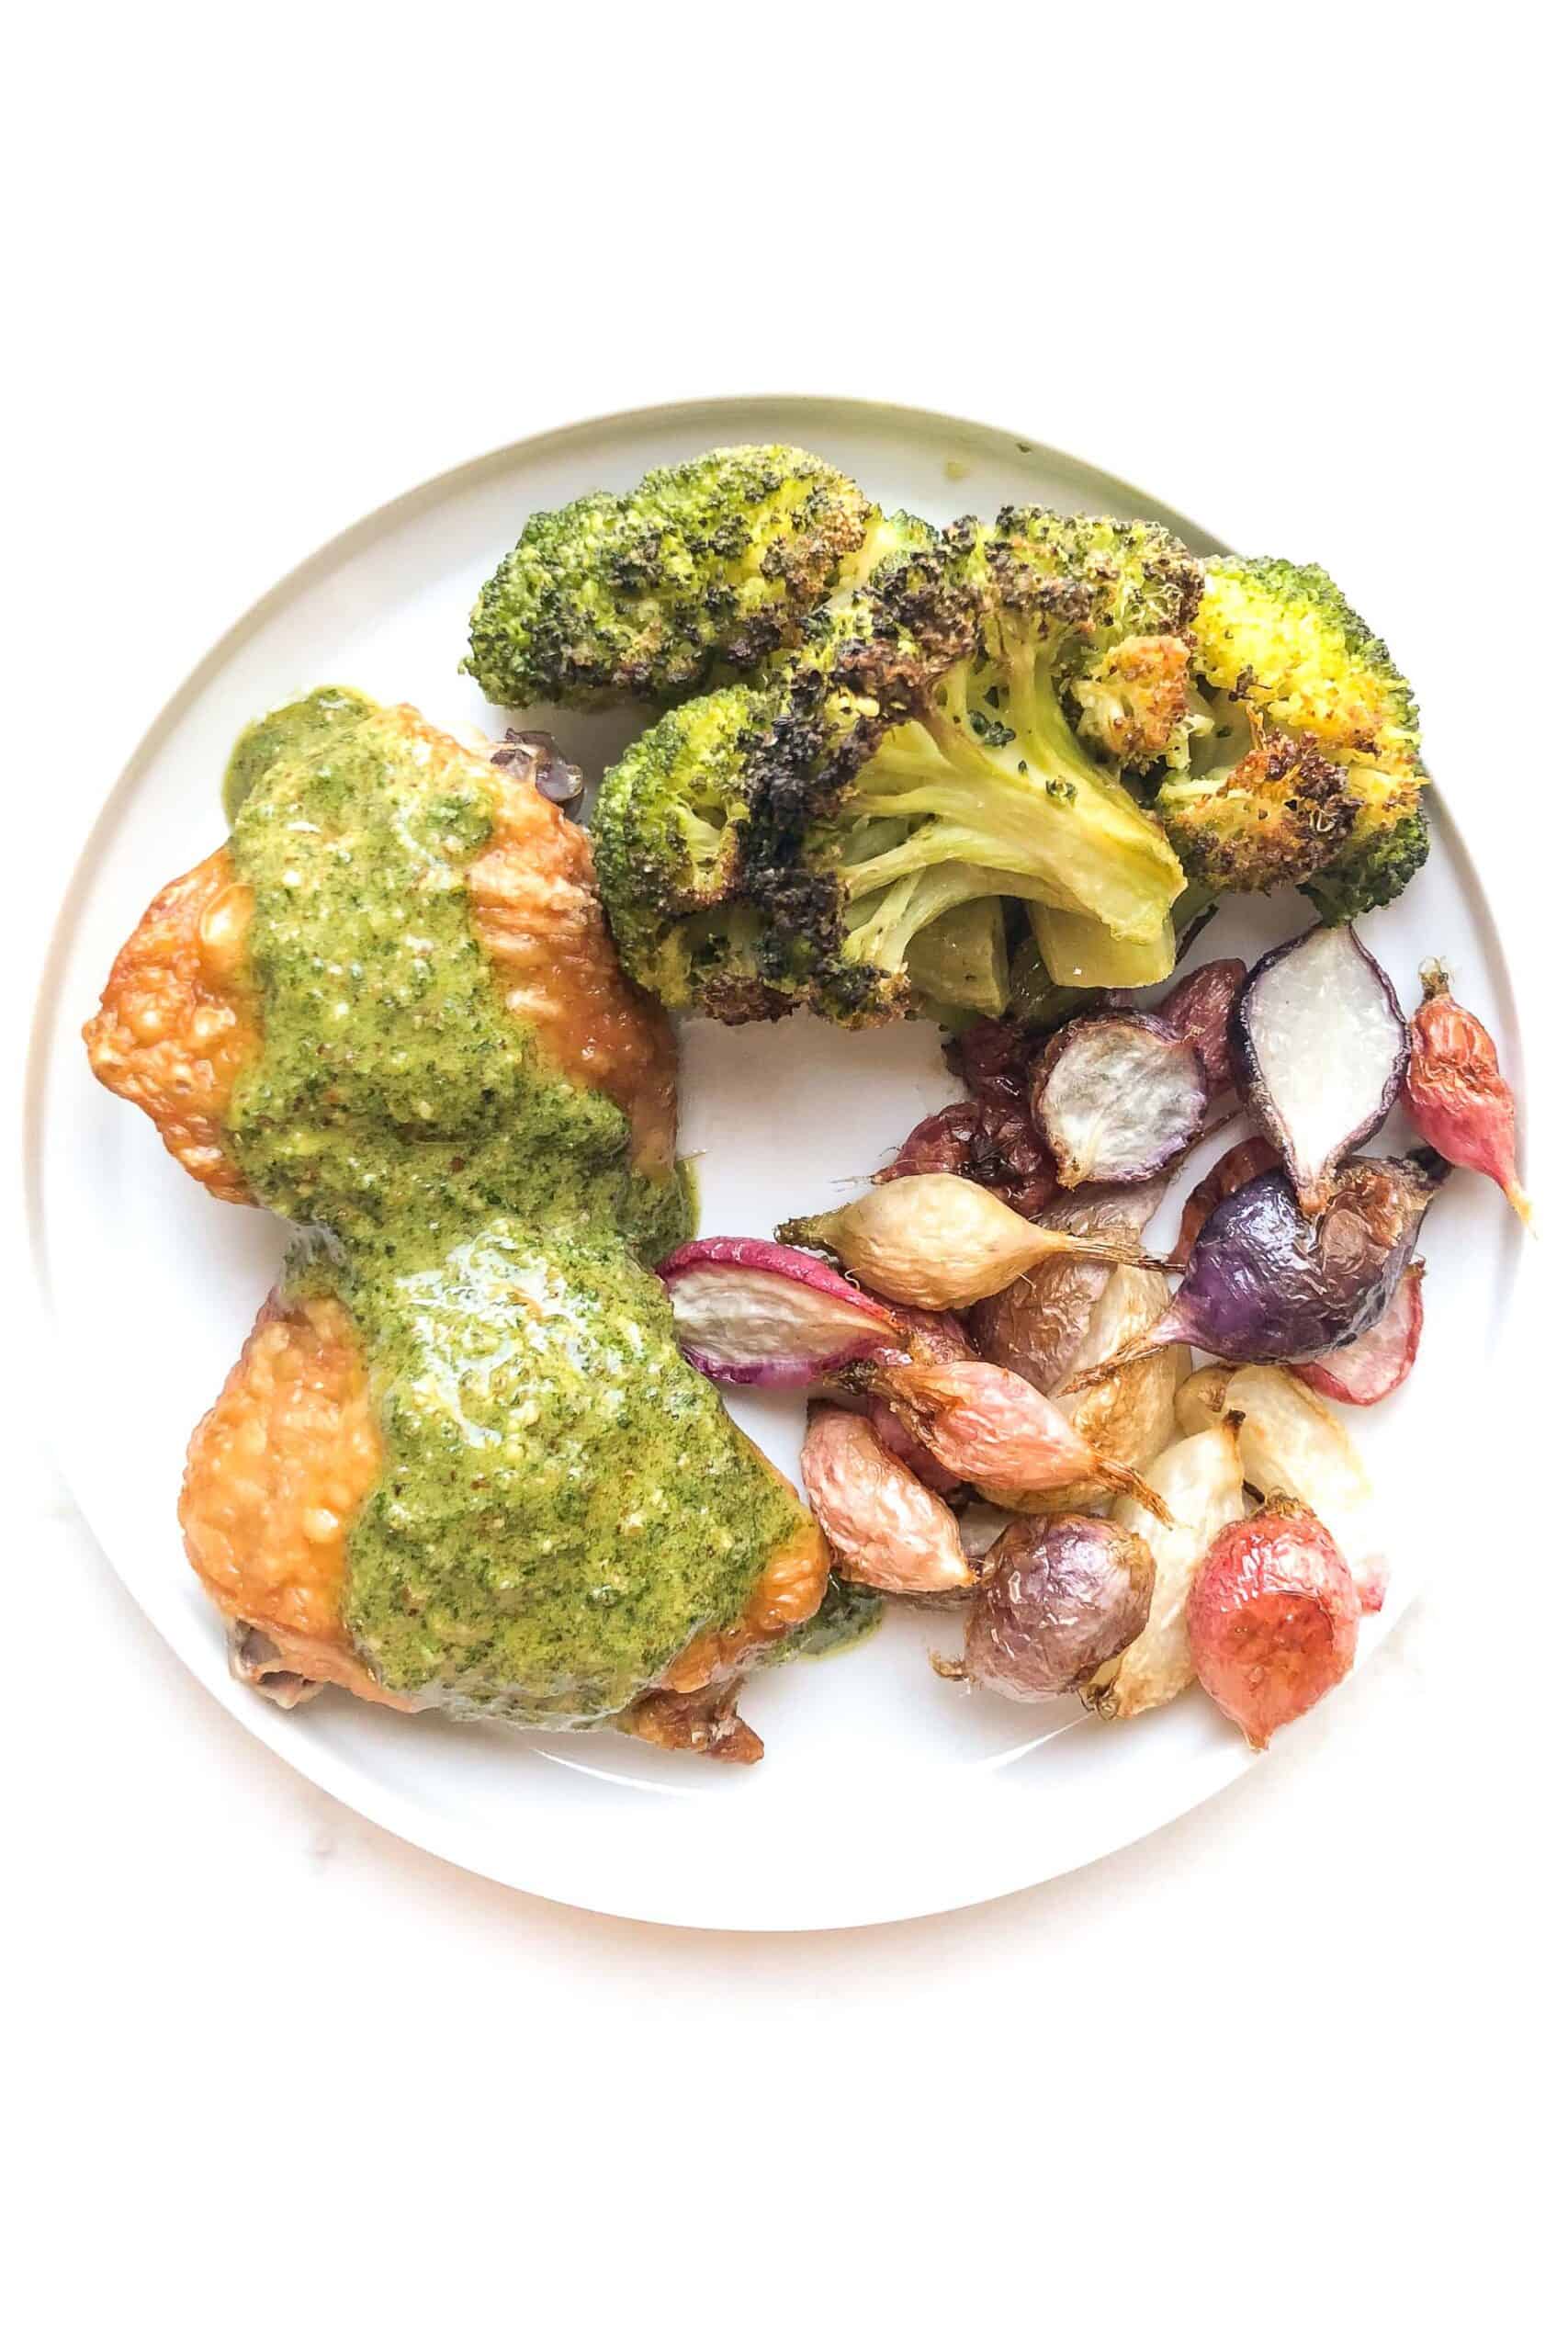 crispy chicken thighs topped with a green orange parsley sauce, roasted radishes and roasted broccoli on a white plate and background